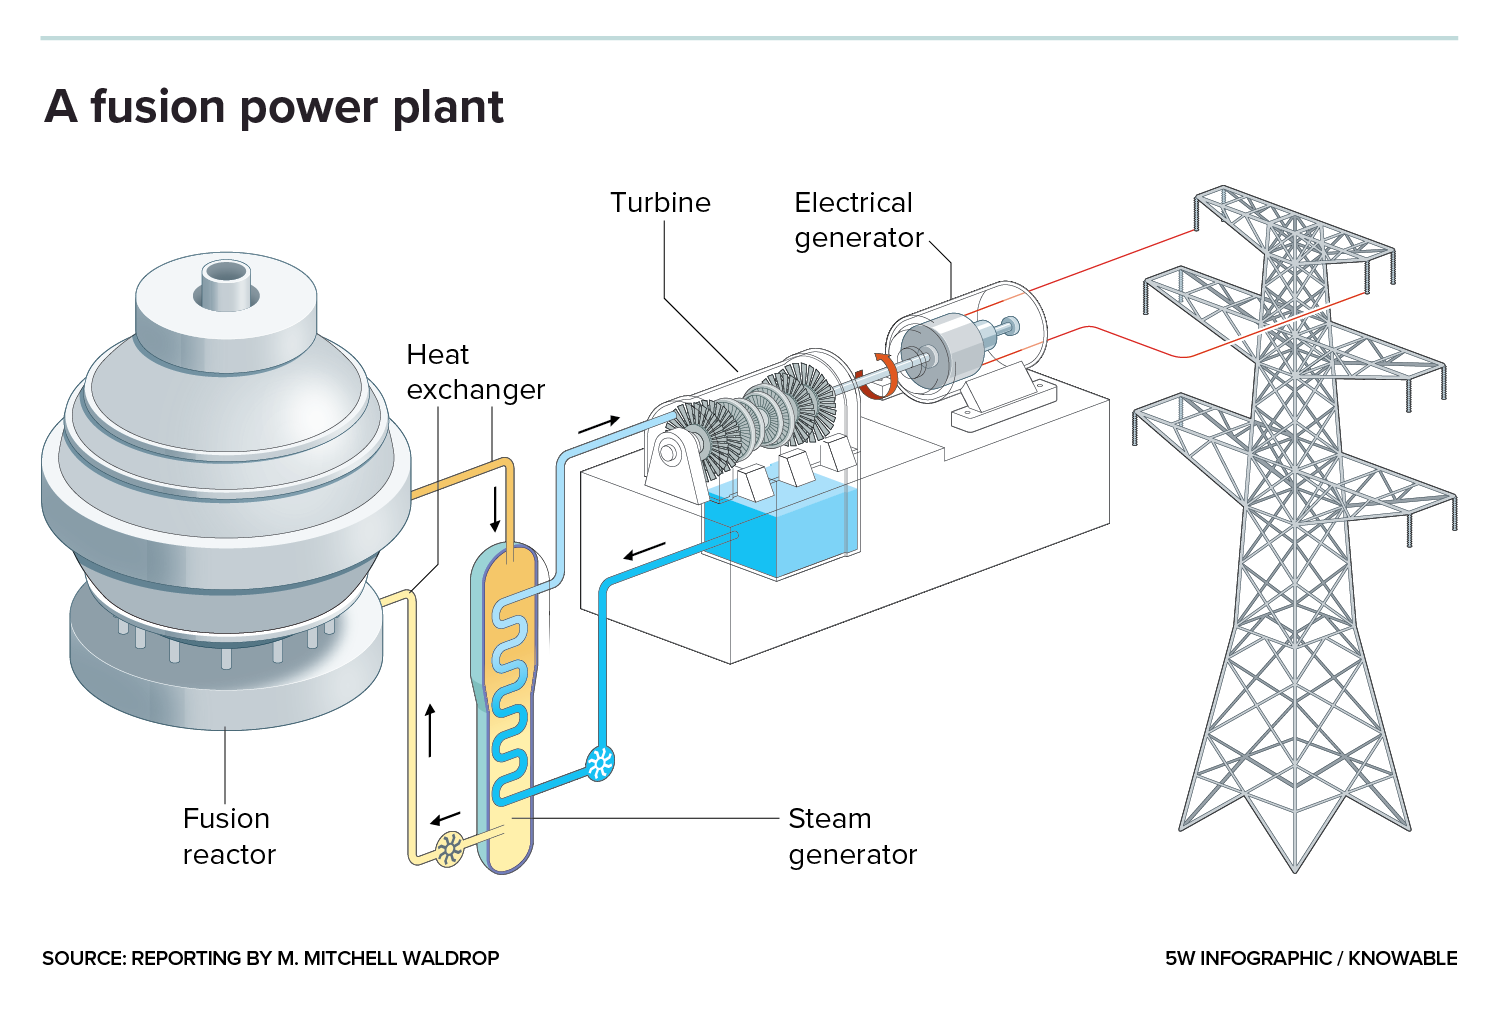 Graphic of a fusion reactor connected a steam generator and turbine that’s connected to a utility pole in the electrical grid.